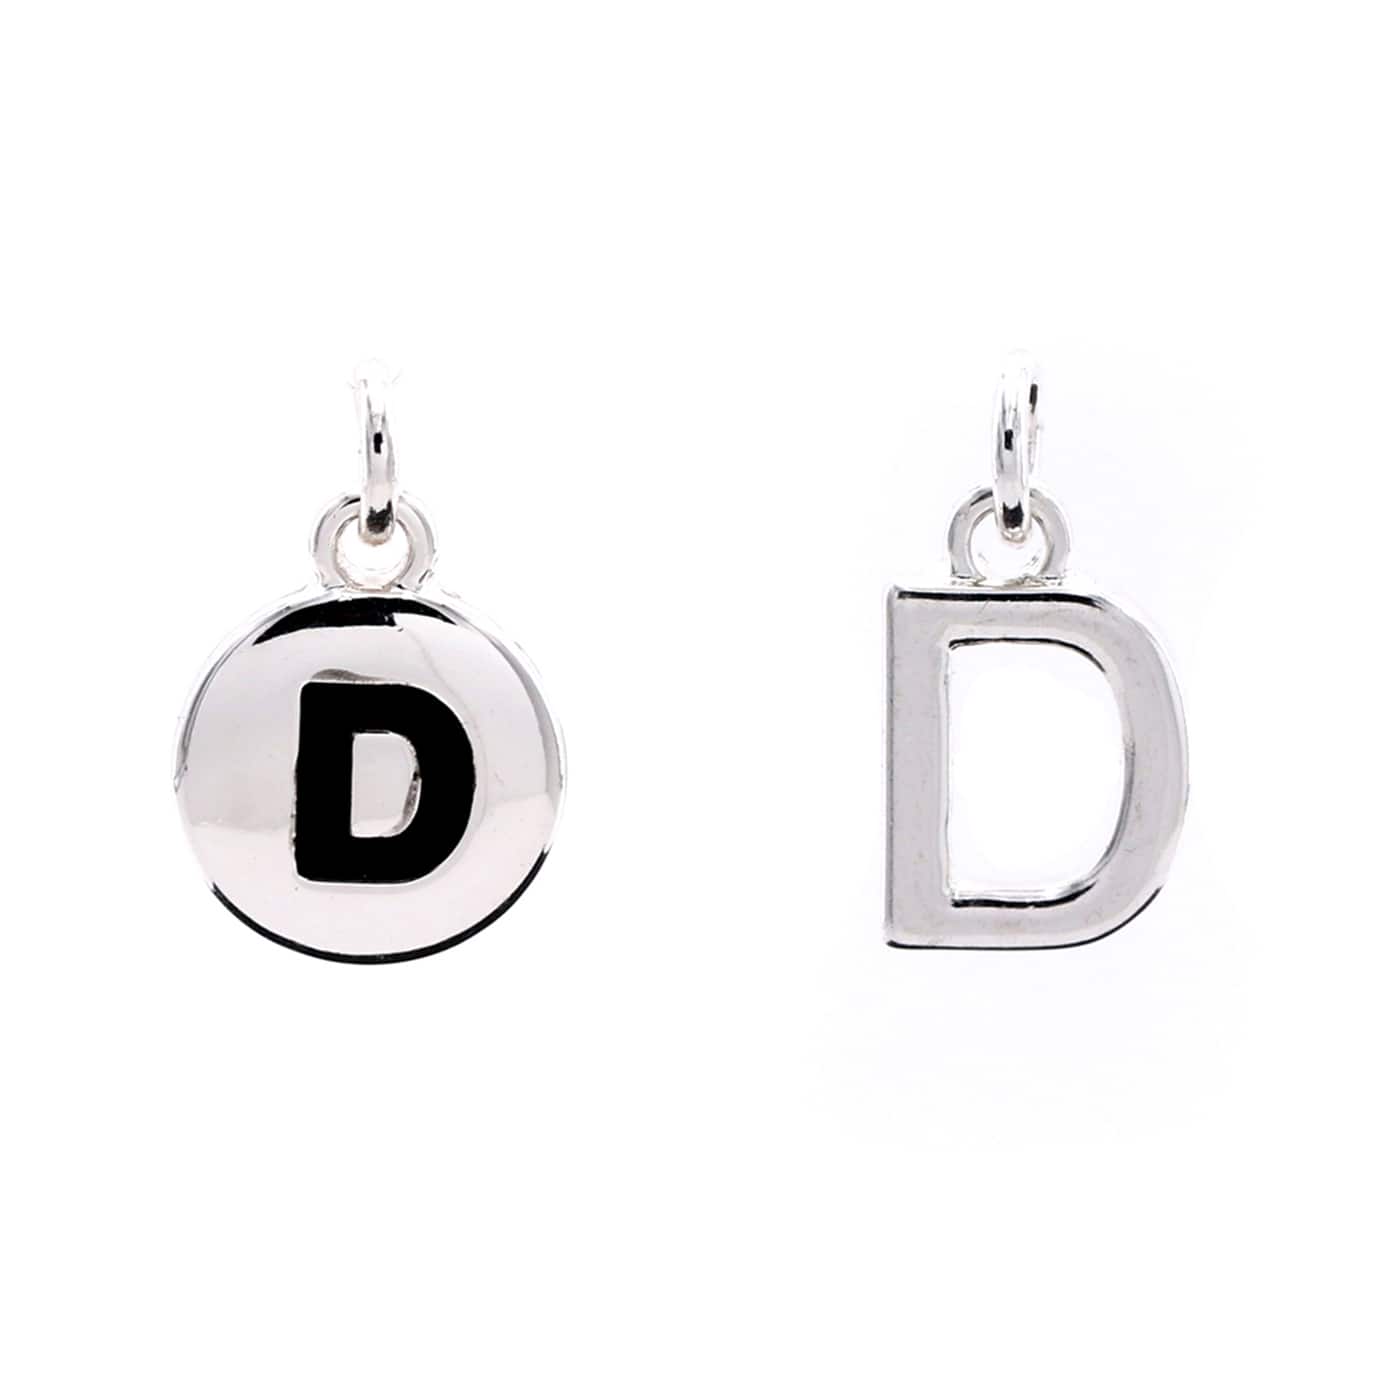 Bead Landing Charmalong Silver Plated Letter Charms - Each